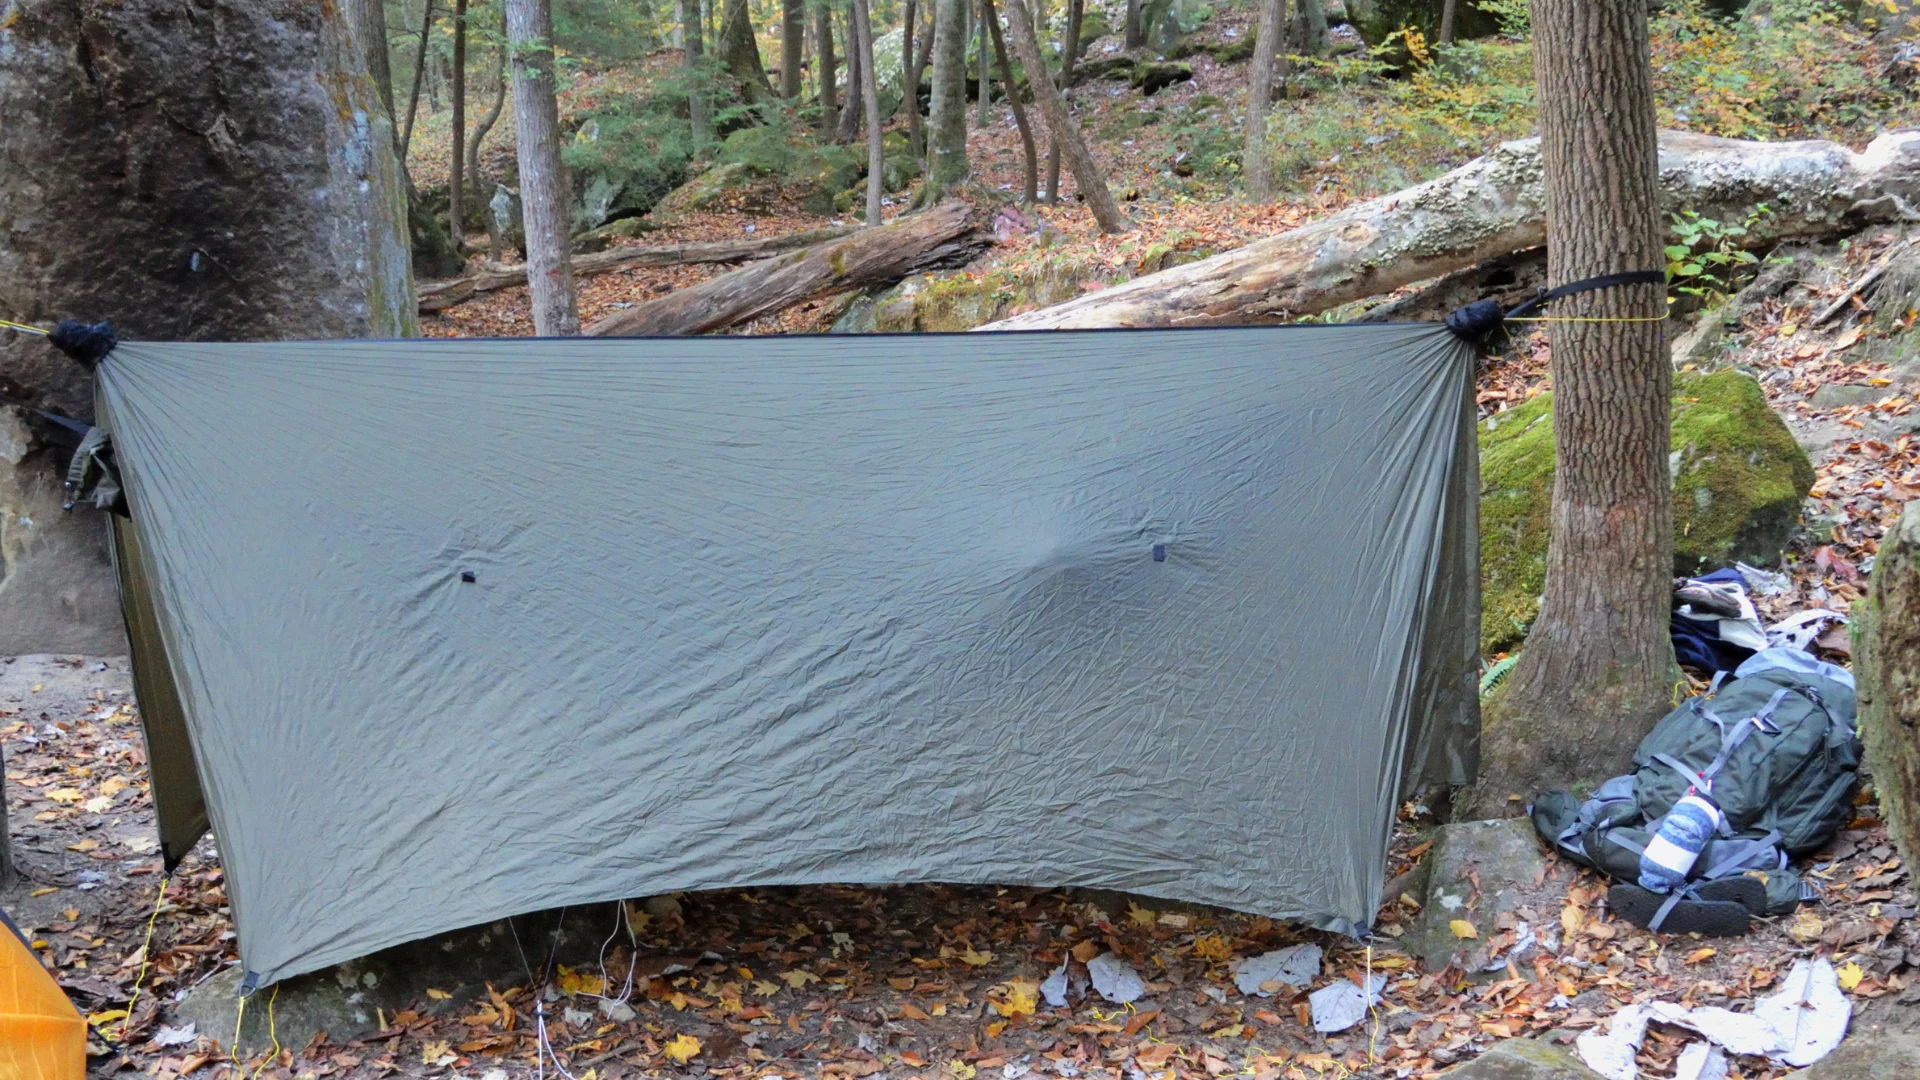 Tube tent set up in forest